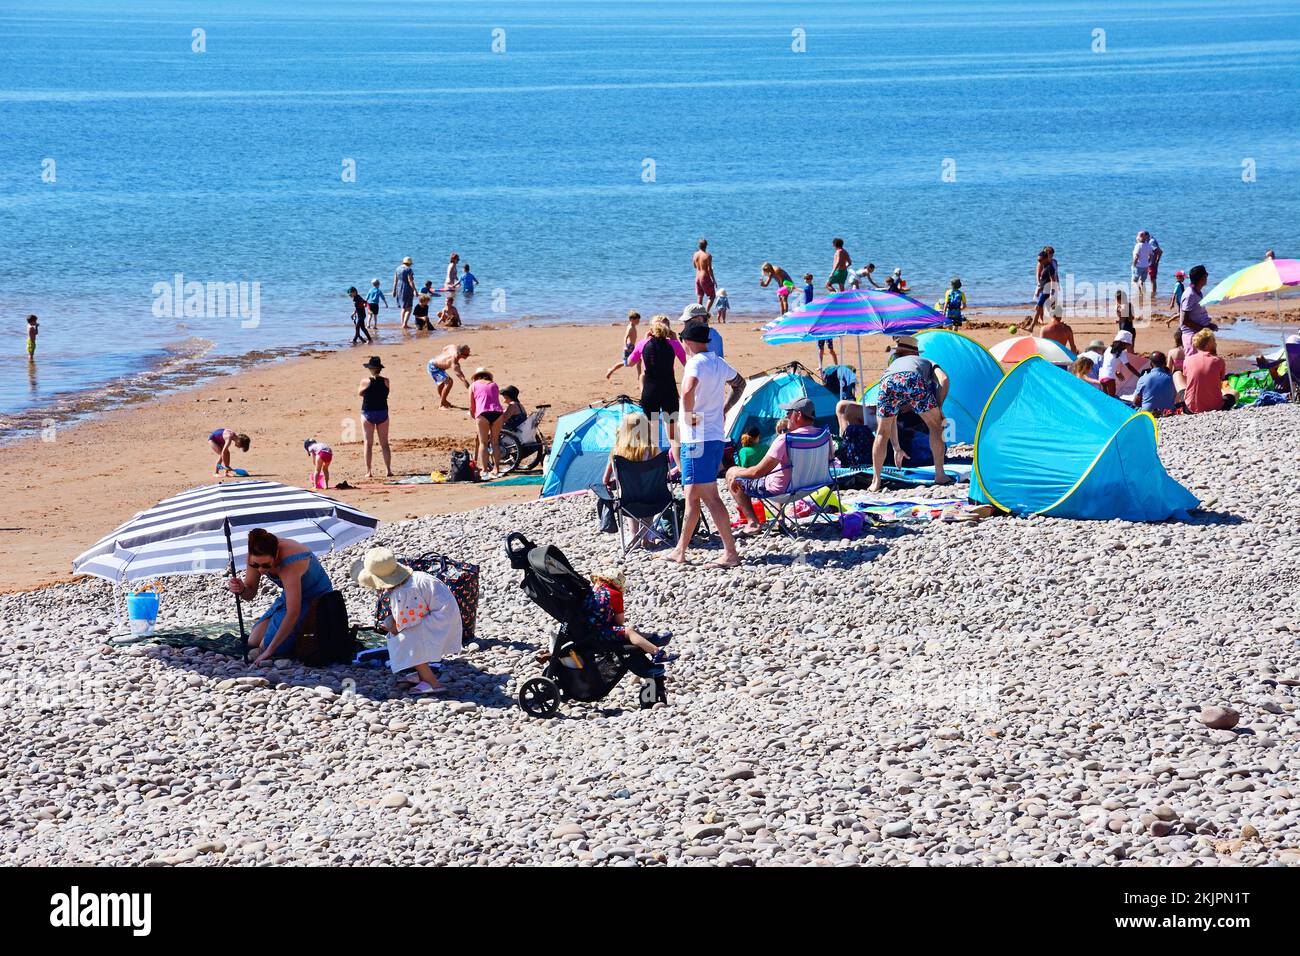 Tourists relaxing on the beach with the sea to the rear, Sidmouth, Devon, UK, Europe. Stock Photo